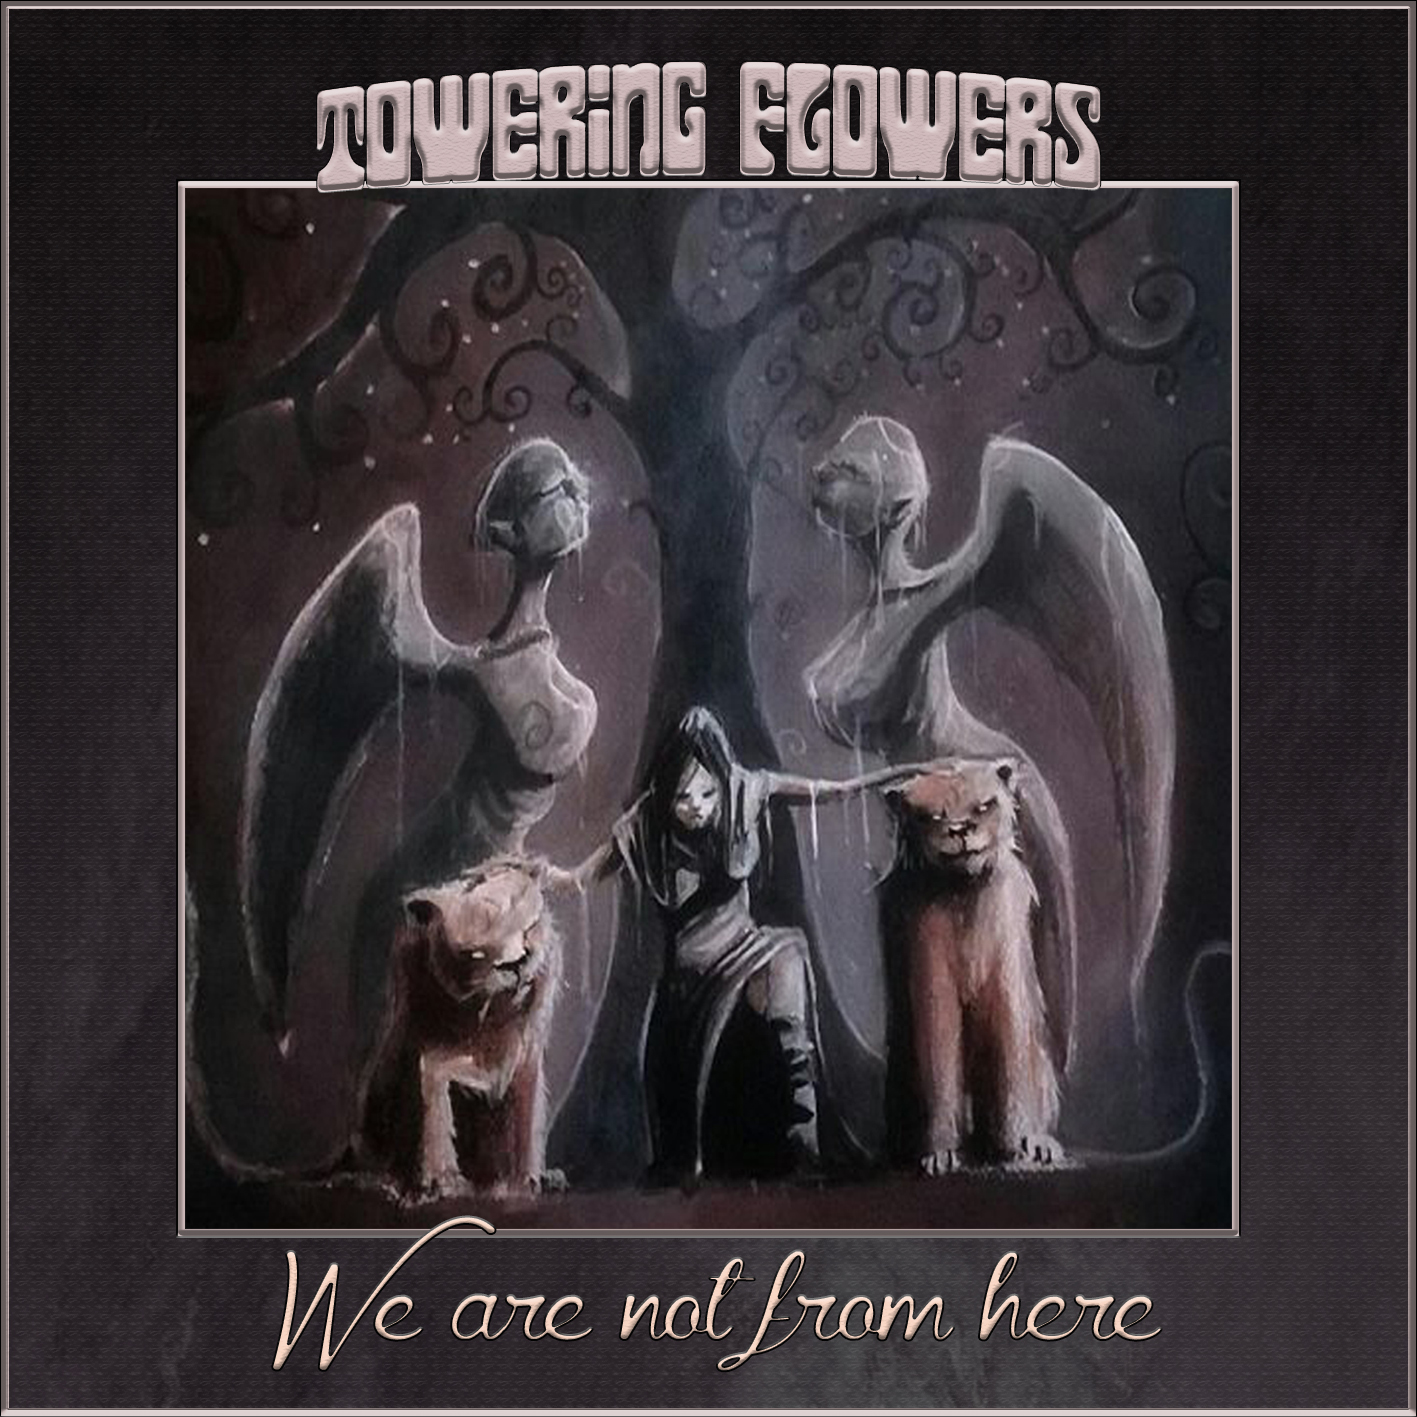 We Are Not From Here, il primo EP di Towering Flowers